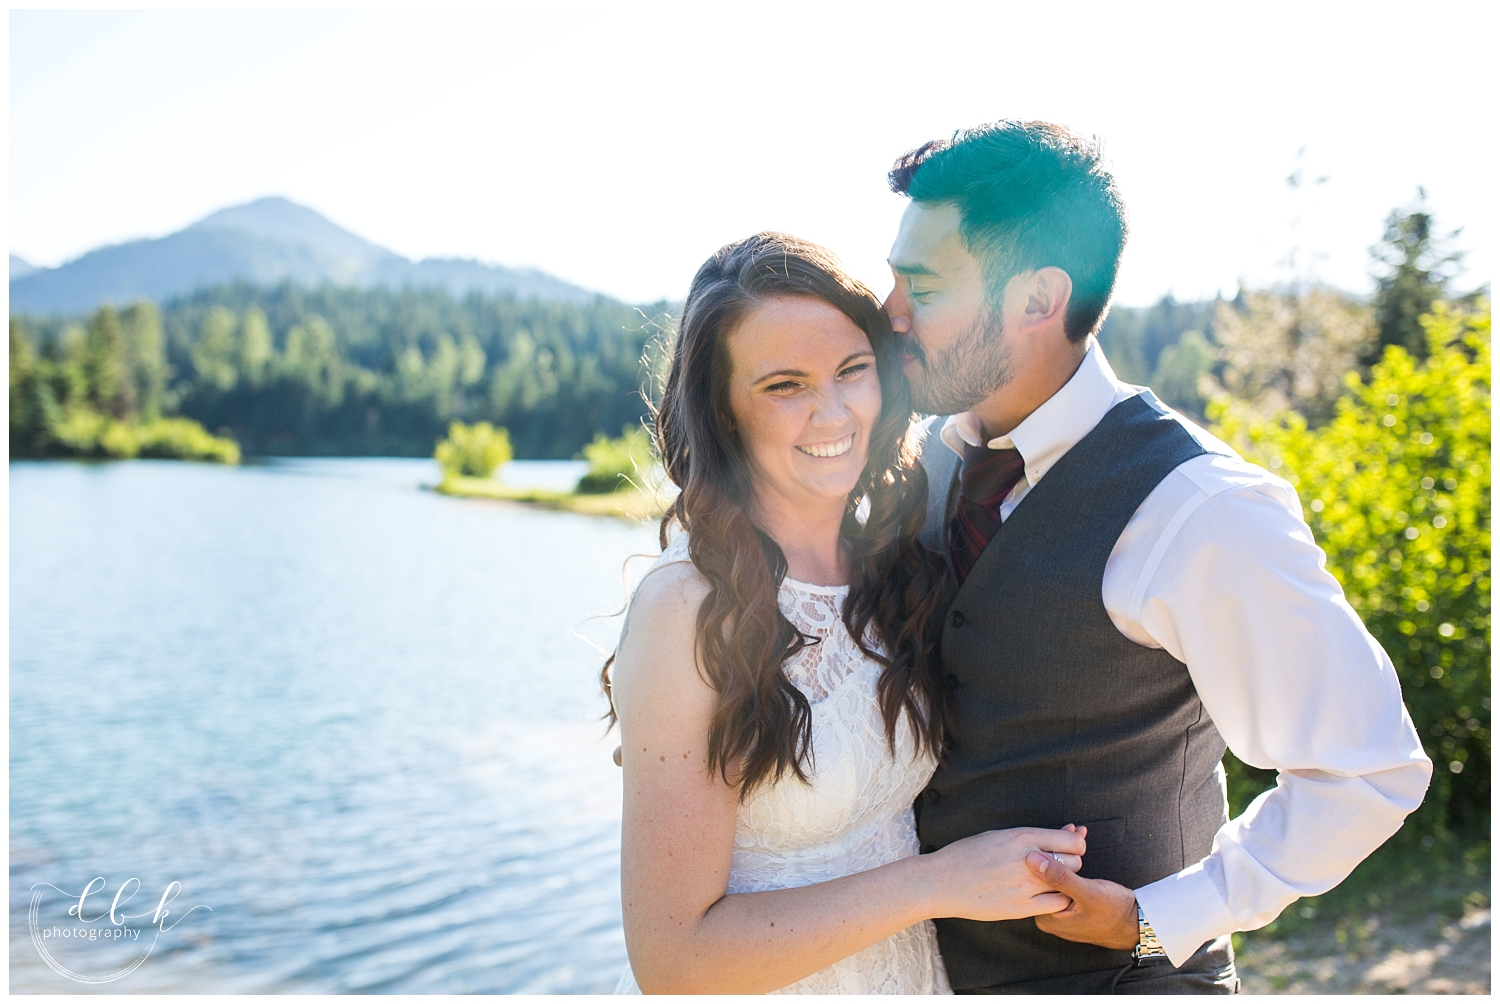 groom in tie and vest kisses bride on the head by the water at Gold Creek Pond